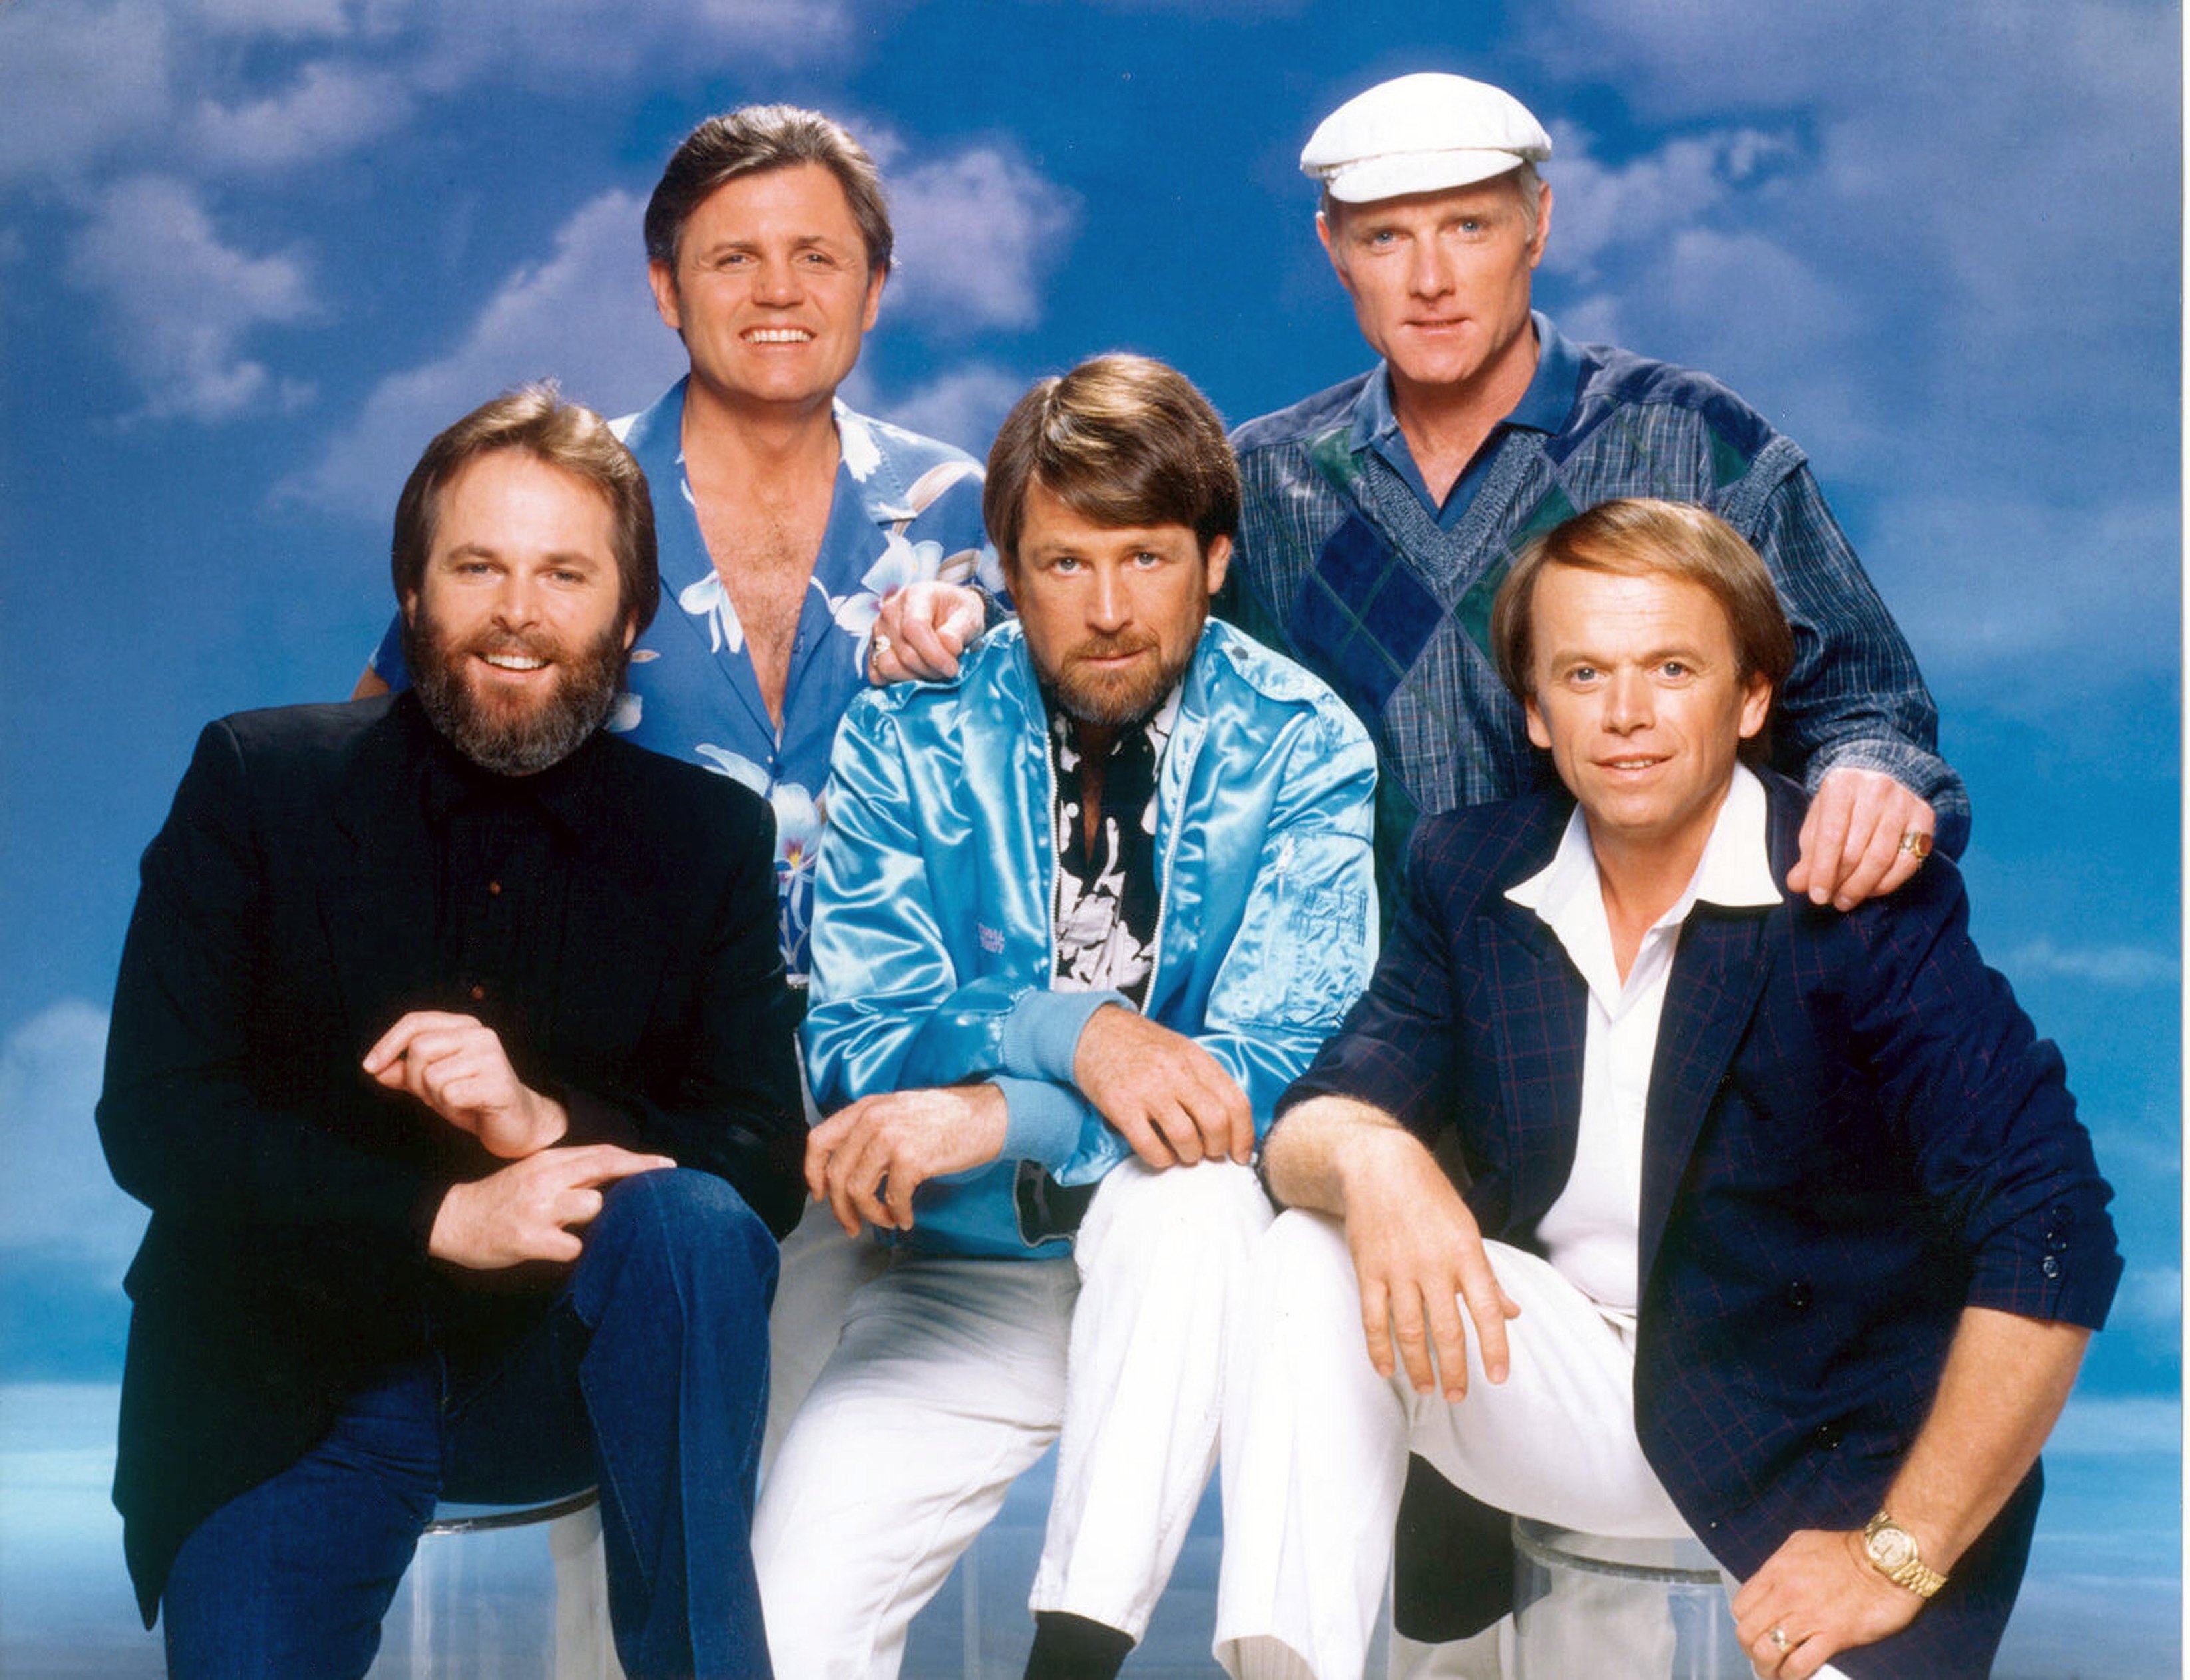 Wilson was a co-founder of the band, Beach Boys